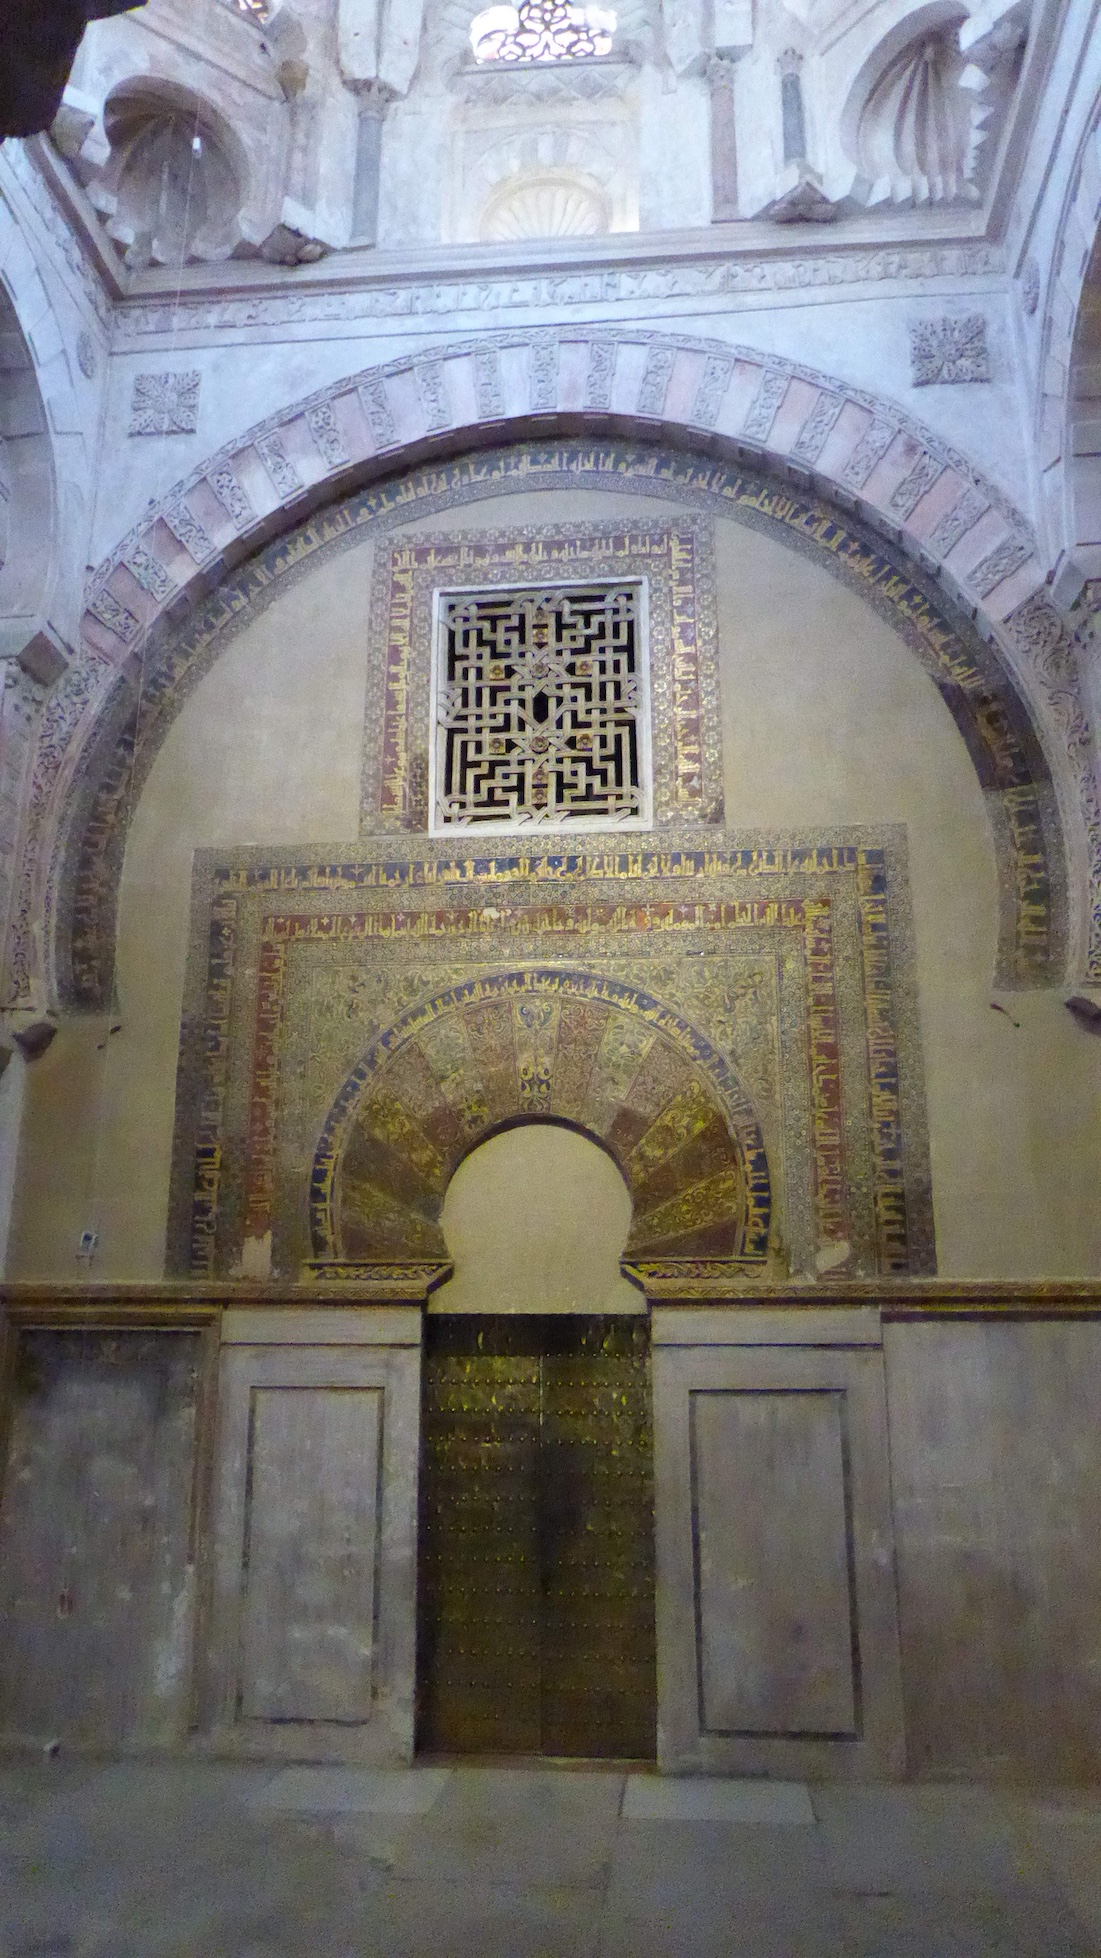 The Mihrab of the Mezquita of Cordoba